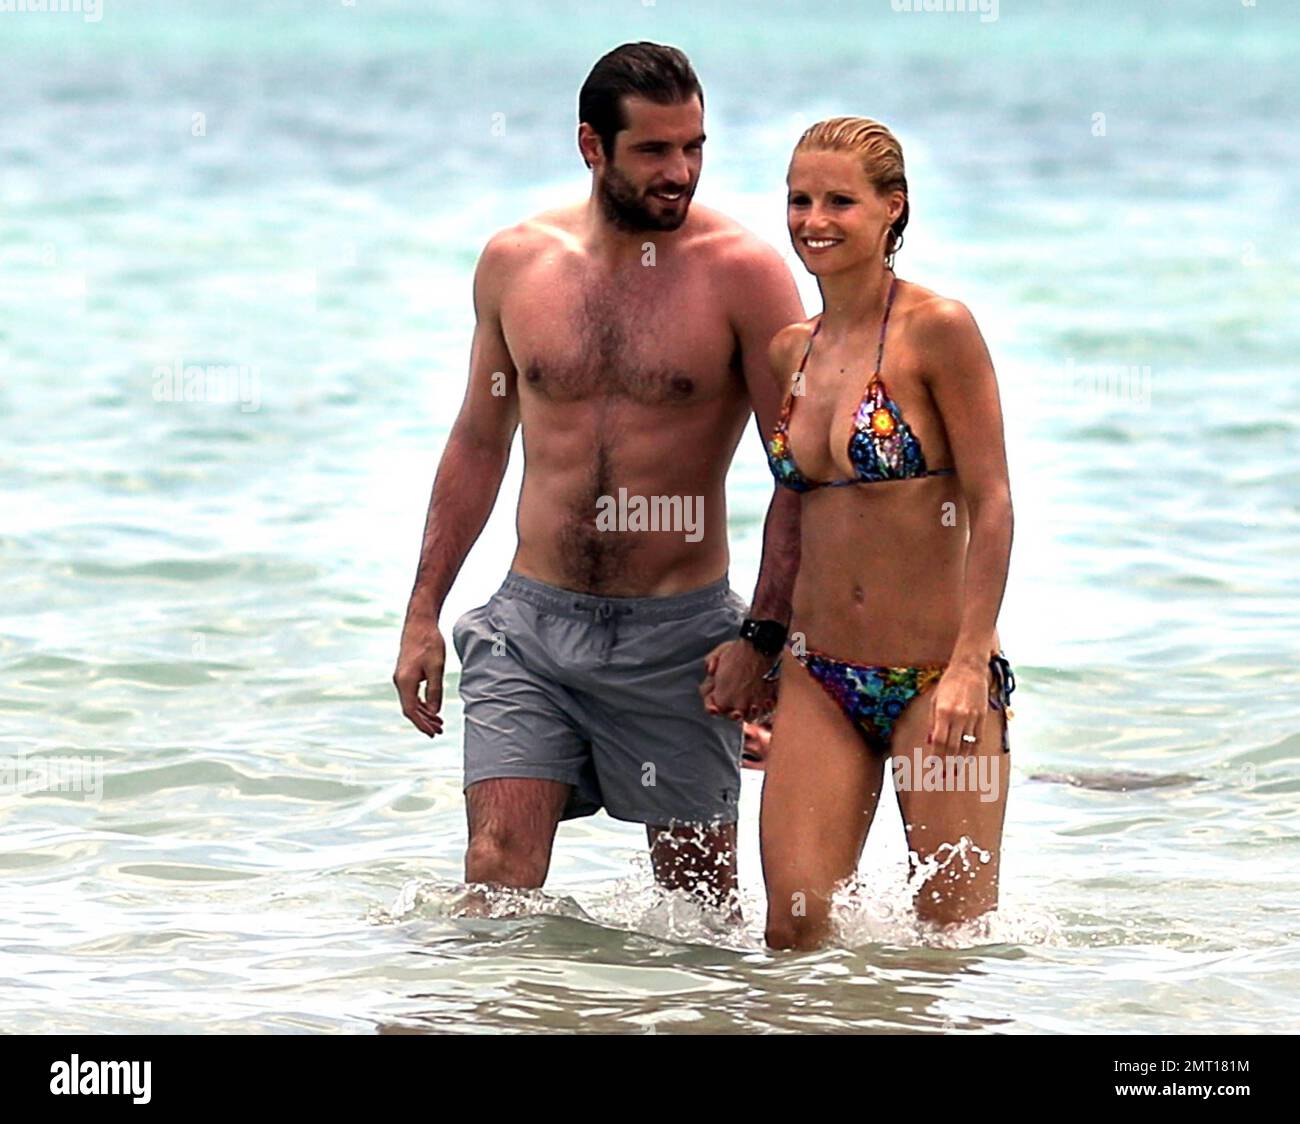 Swiss TV host and actress Michelle Hunziker spends the day in Miami Beach with boyfriend Tomaso Trussardi. 35 year old Hunziker wore a multi-color string bikini that showed off her amazing toned figure. The couple were seen taking a dip in the ocean and happily walking hand-in-hand. Miami Beach, FL. 3rd June 2012. Stock Photo